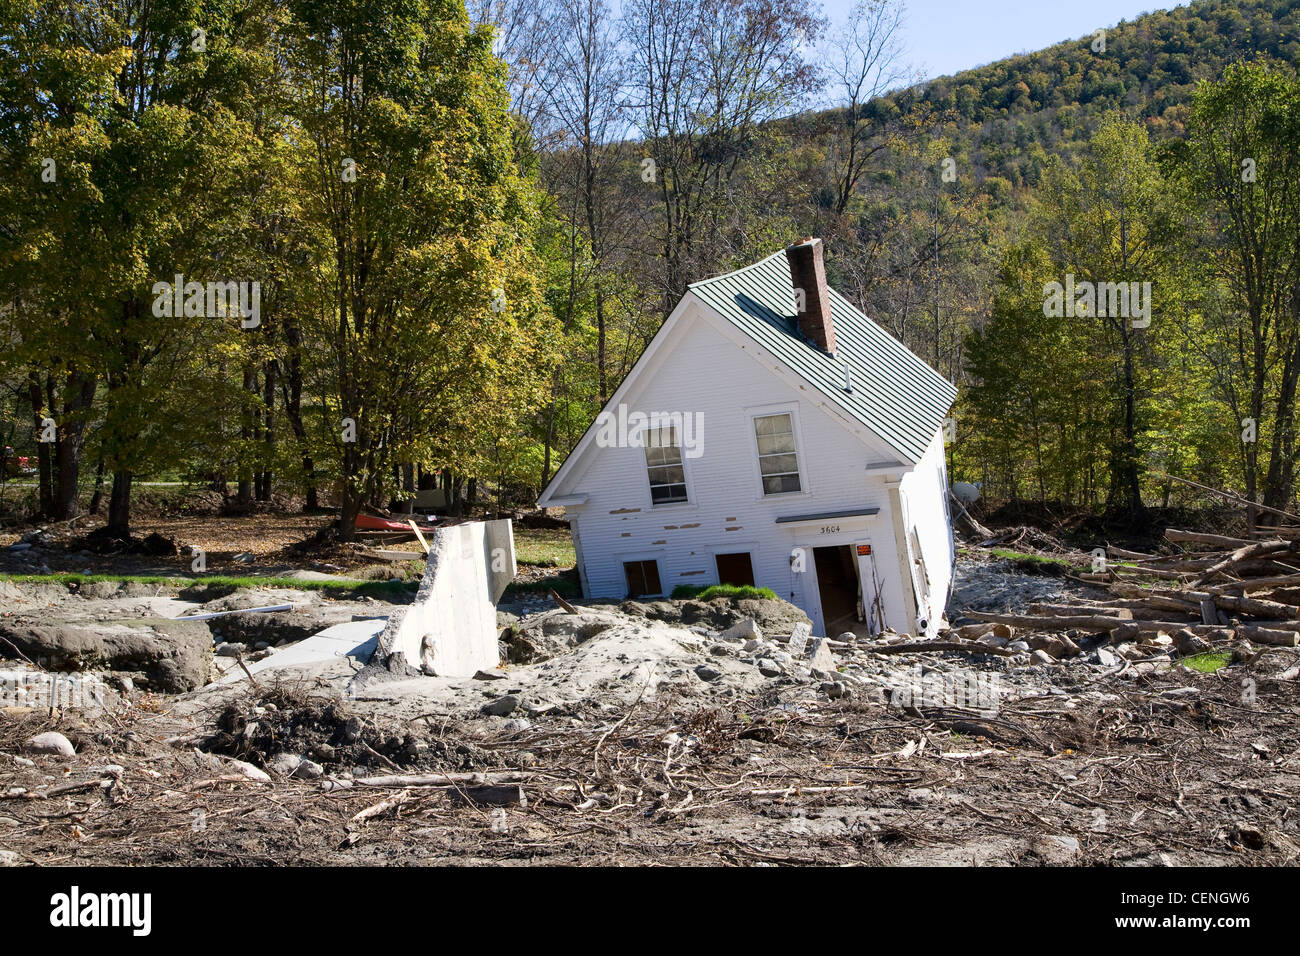 A house washed off its foundation due to flood damage in Warren Vermont along the Mad River in 2011 Stock Photo